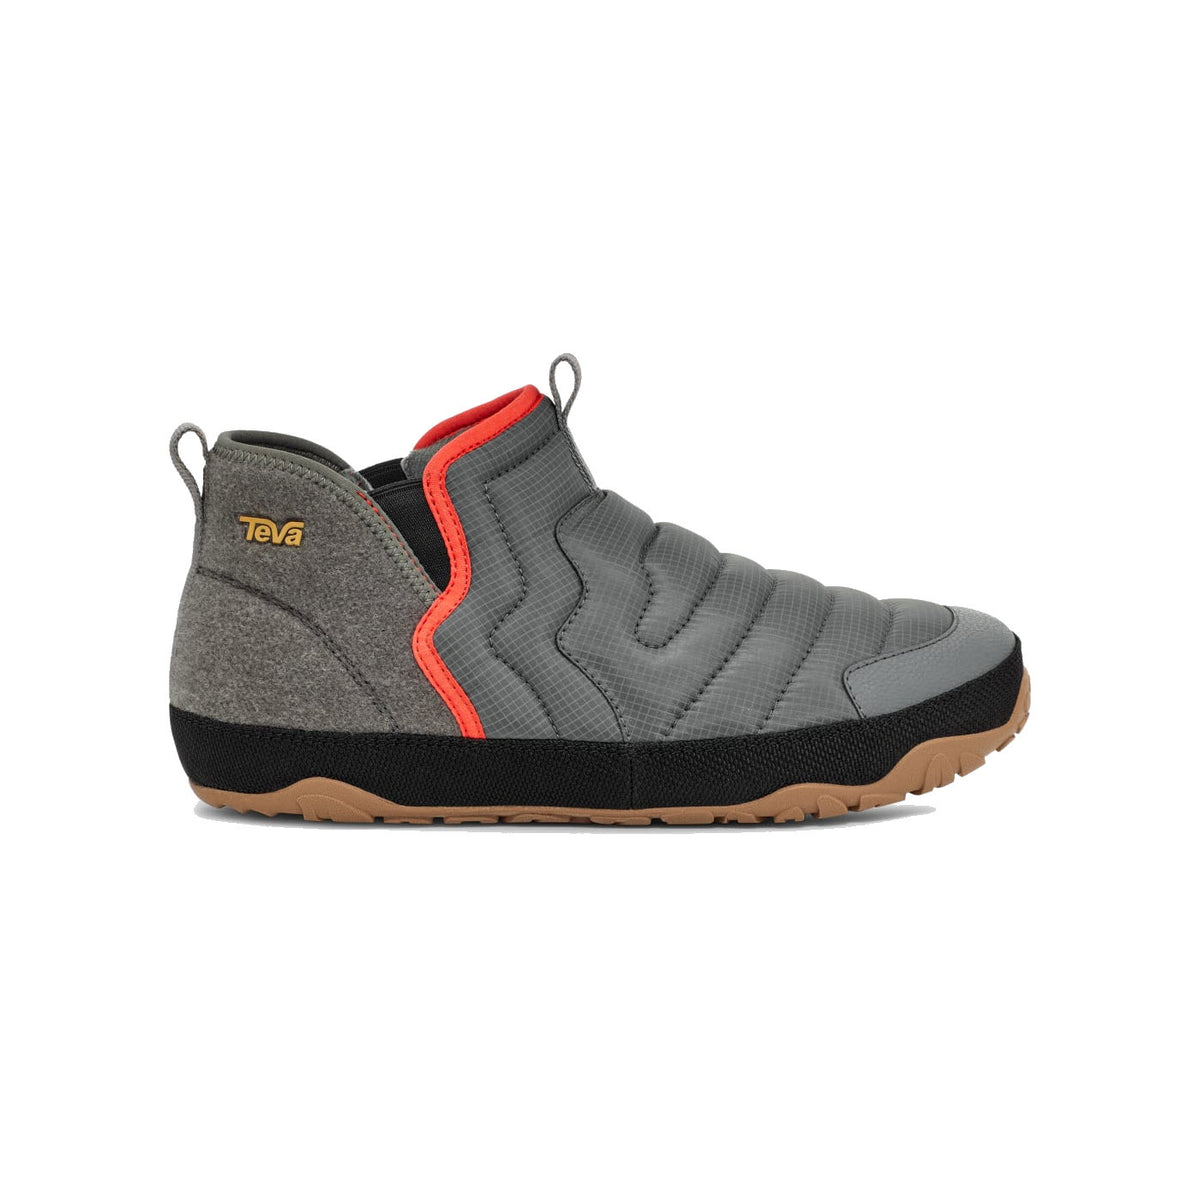 A Teva brand REEMBER TERRAIN MID SLIP ON SEDONA SAGE MULTI - MENS lightweight hiking boot in gray with a red accent, featuring a high-top design and a ULTRA-COMF footbed.